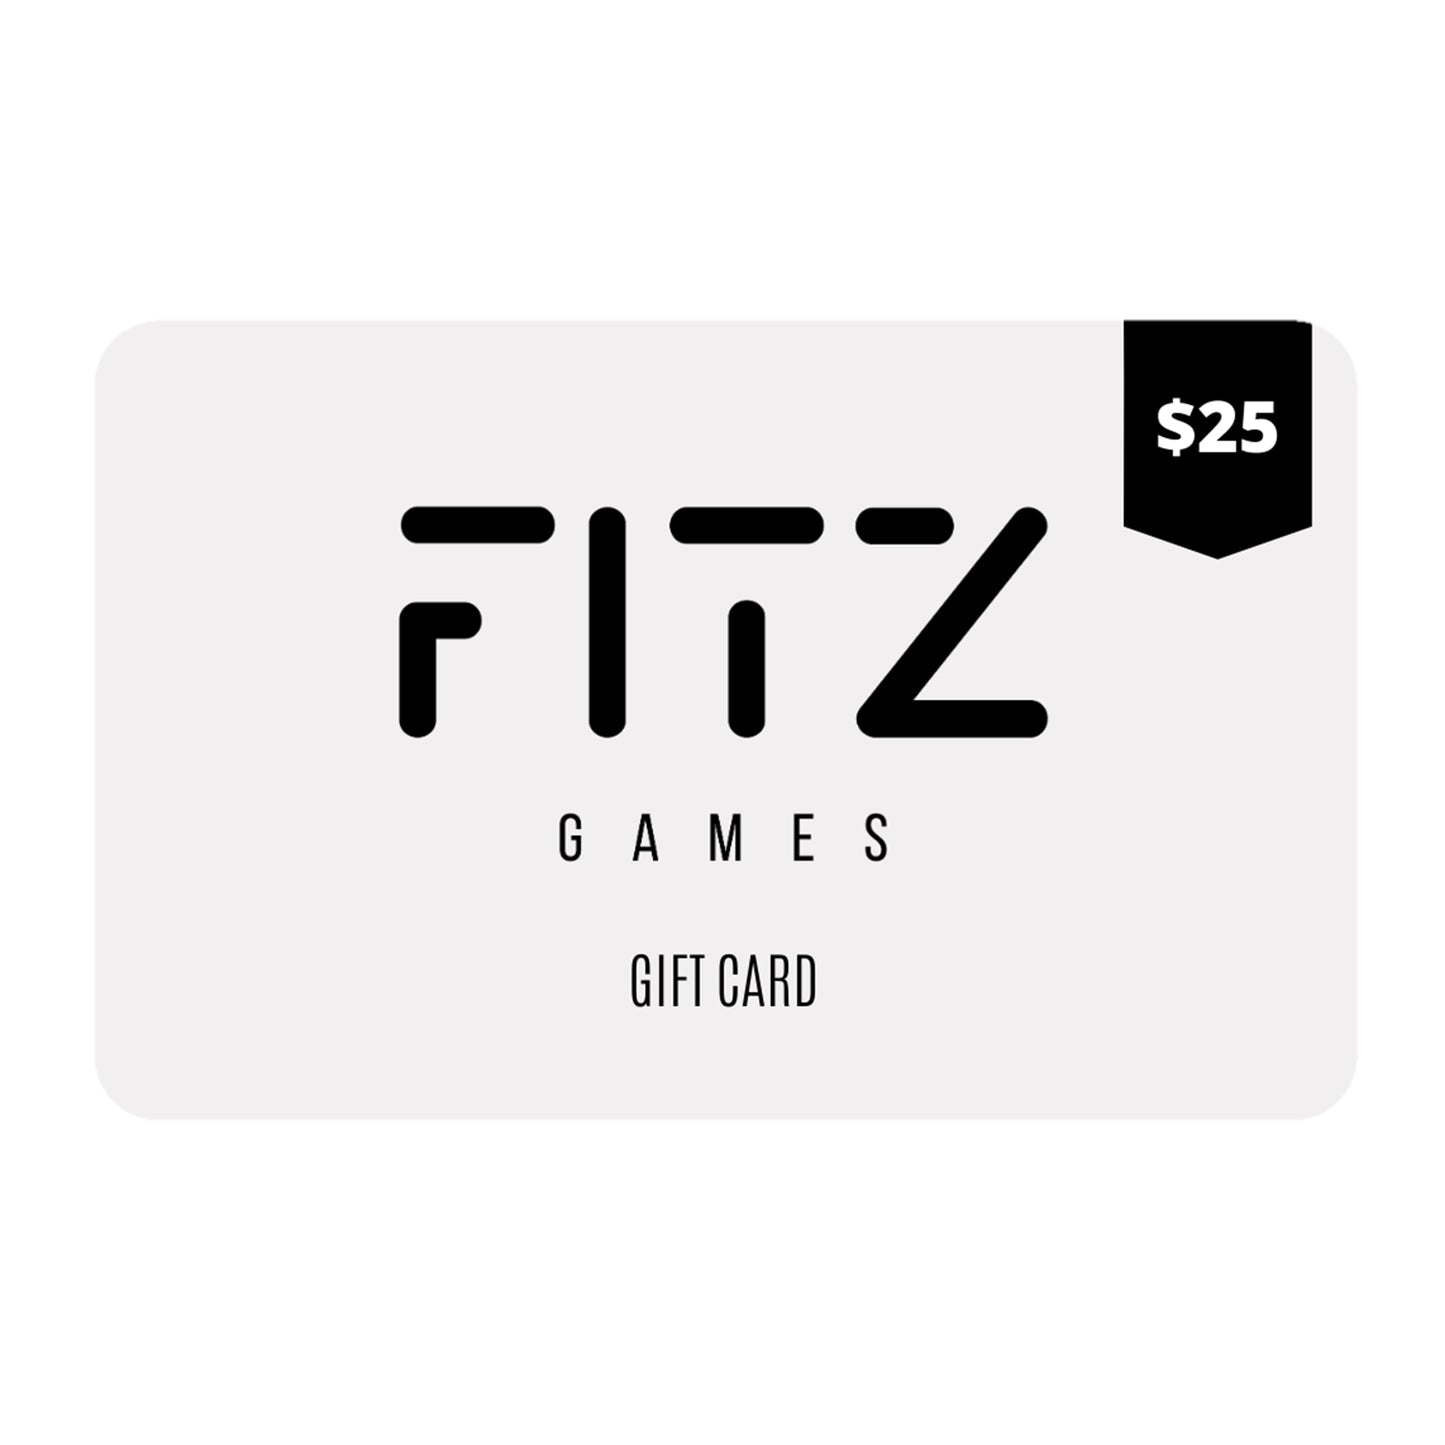 $25 FITZ Games Gift Card